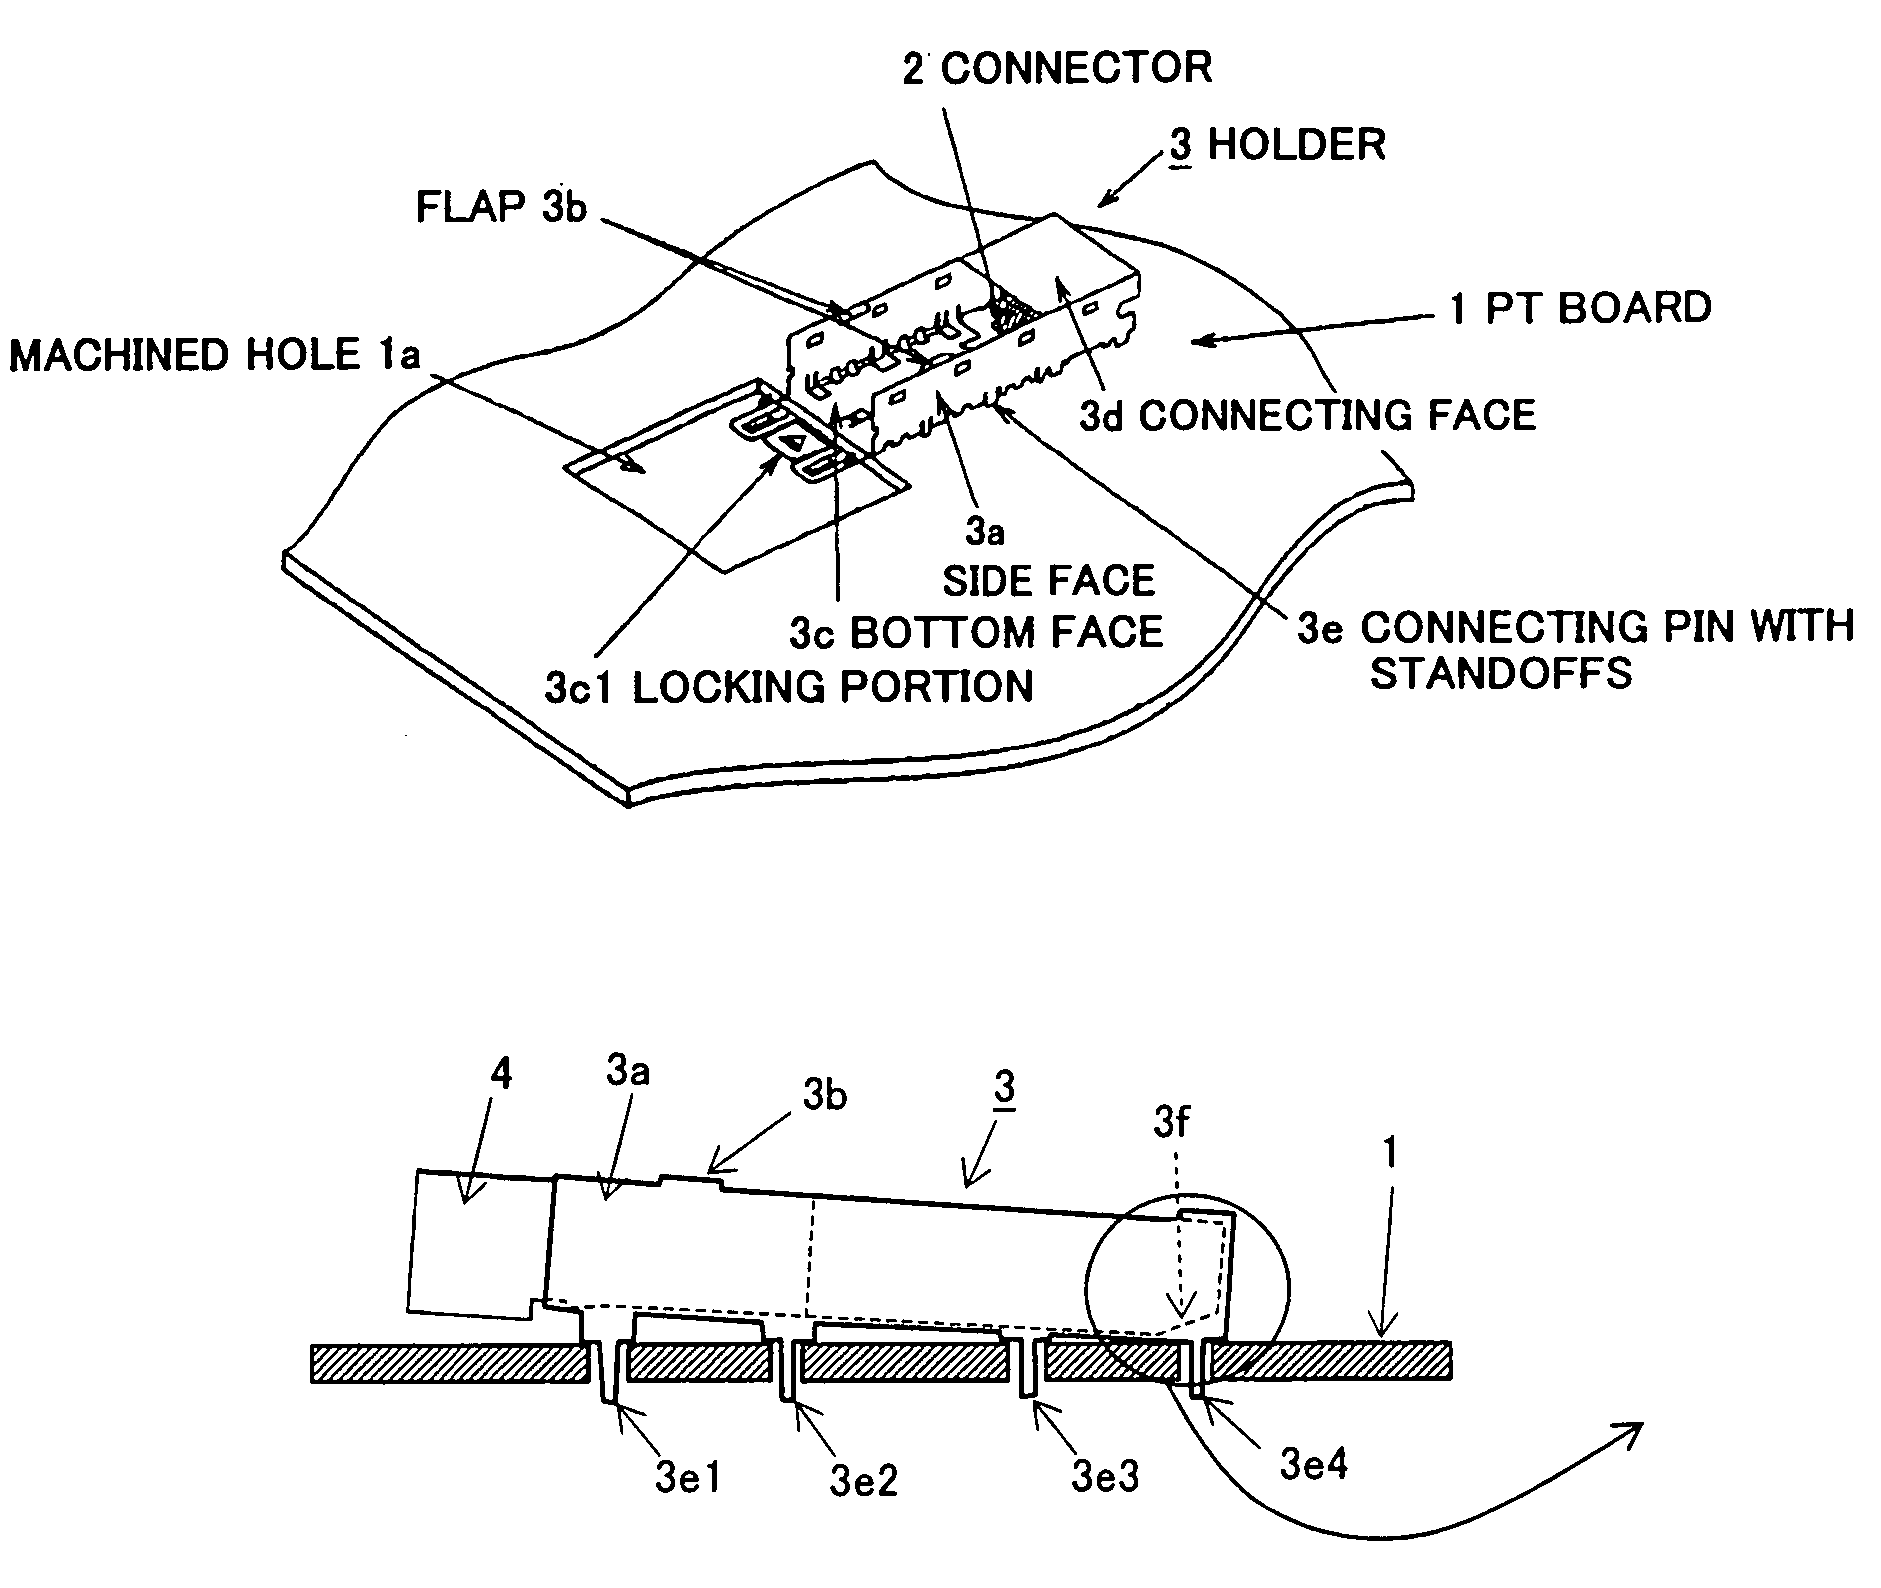 SFP module mounting structure